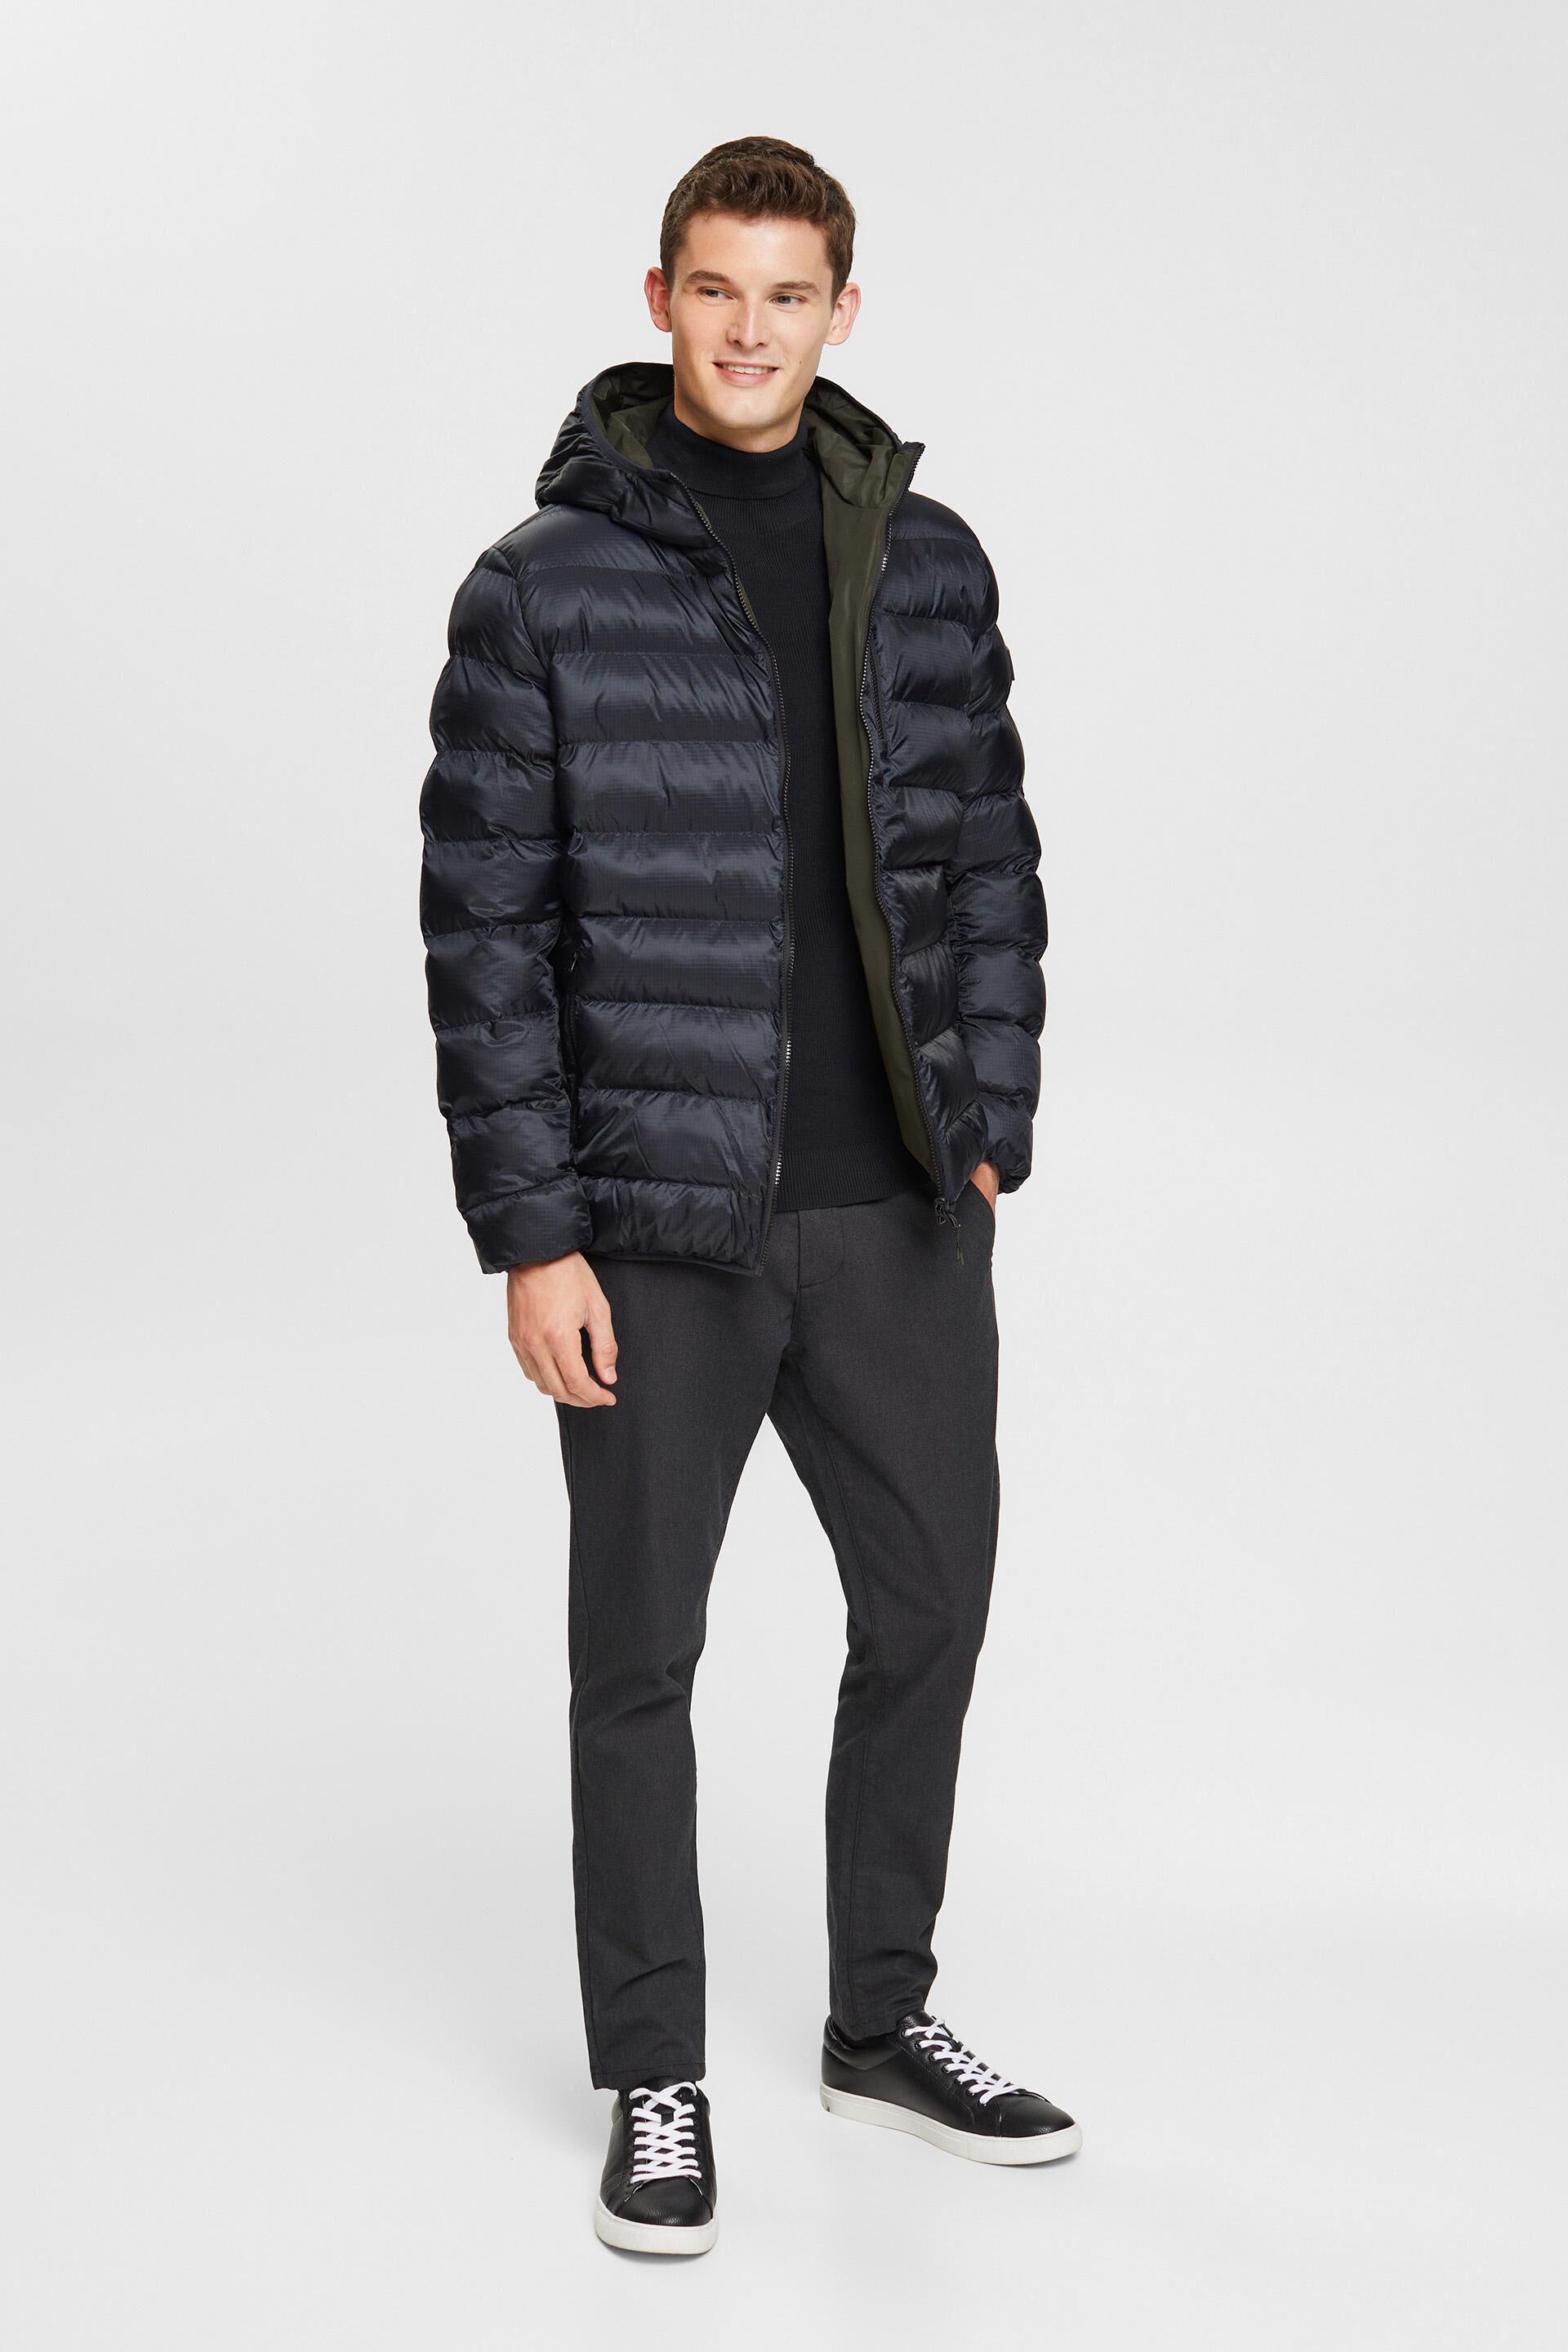 Esprit hood Quilted with jacket